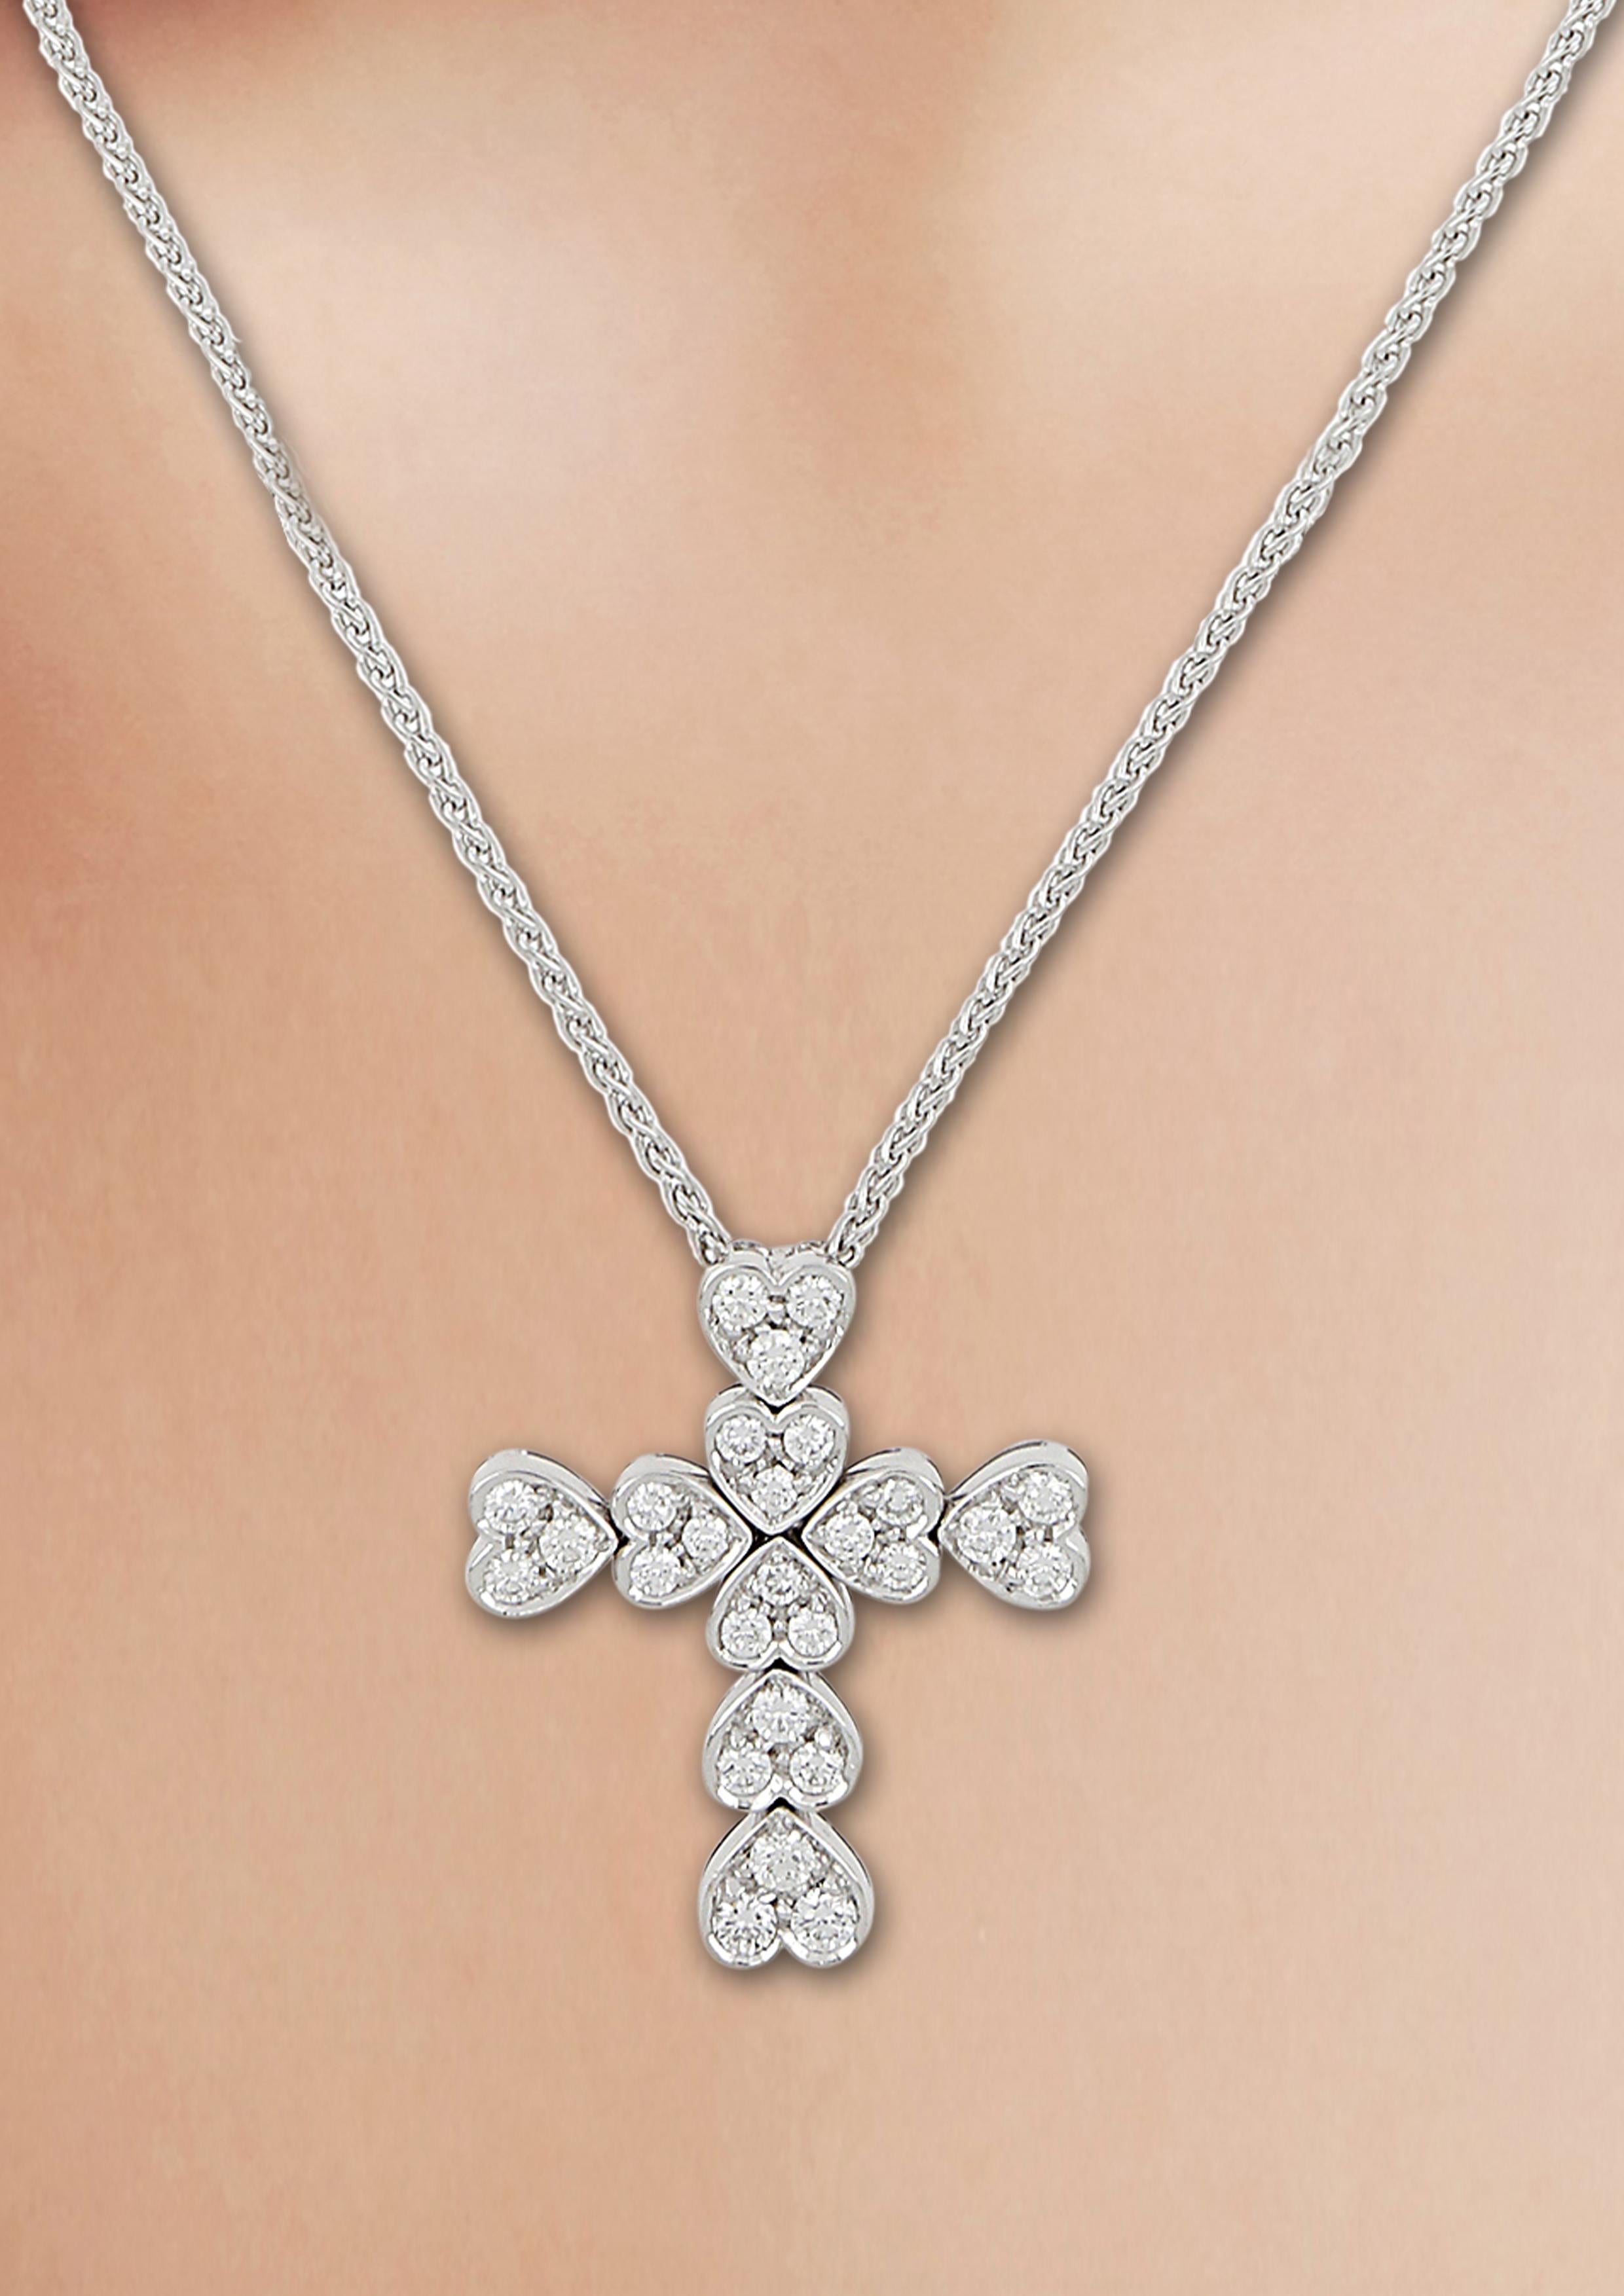 An unusual cross pendent where the four sections are made of delicate hearts each set with three diamonds.
Round Diamonds 0.74 carat - F/G color - VS clarity
Chain length 15-3/4 inches
Please note:
We do not ship to Japan.
USA: Shipping expenses and